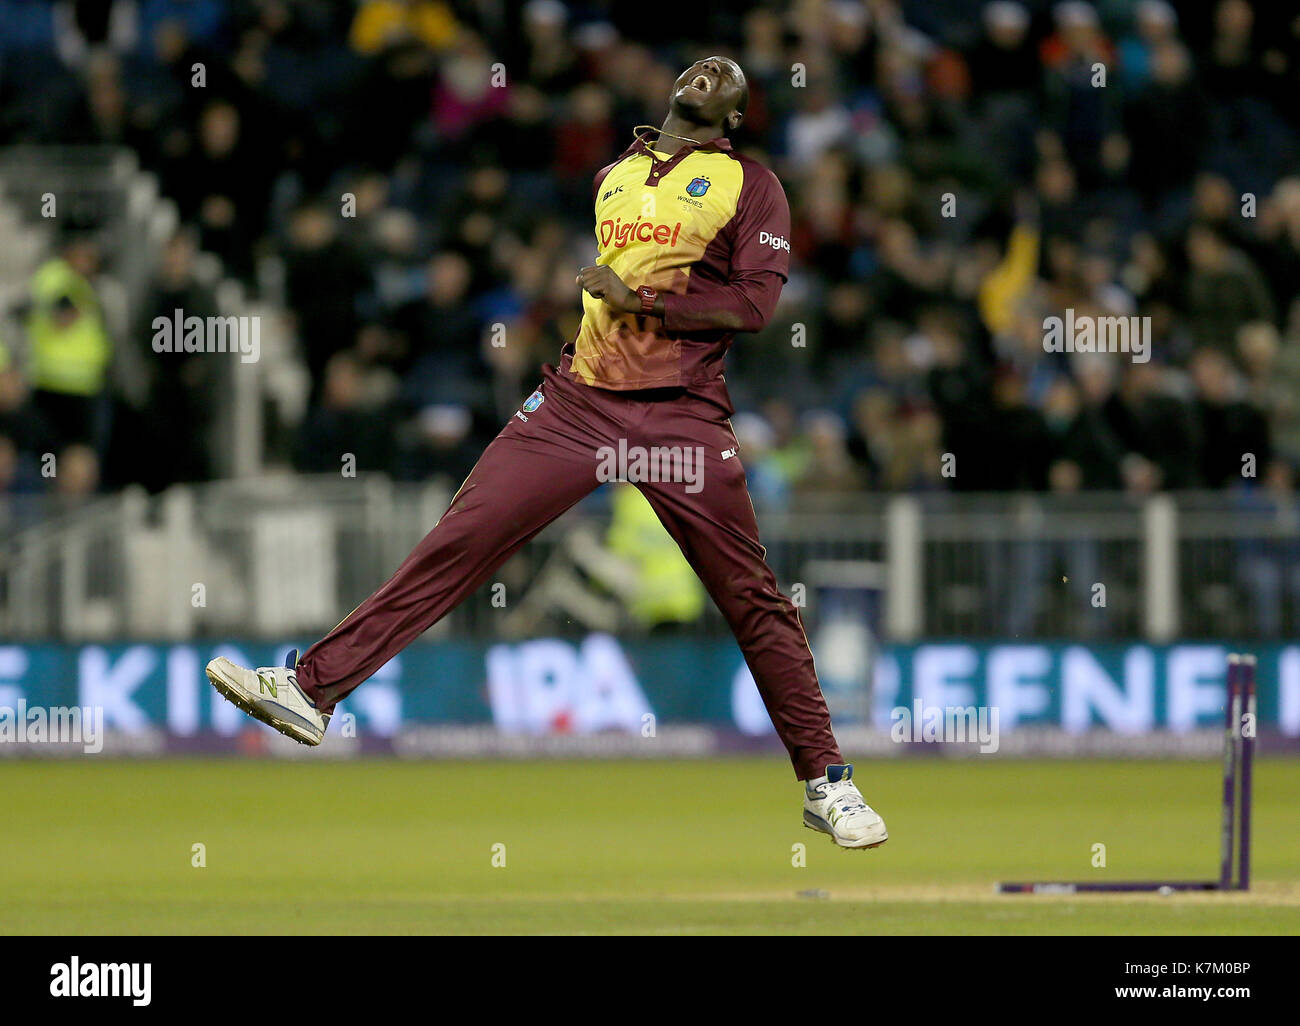 West Indies Carlos Brathwaite celebrates after taking the wicket of England's Liam Plunkett to win the NatWest T20 match at the Emirates Riverside, Durham. Stock Photo